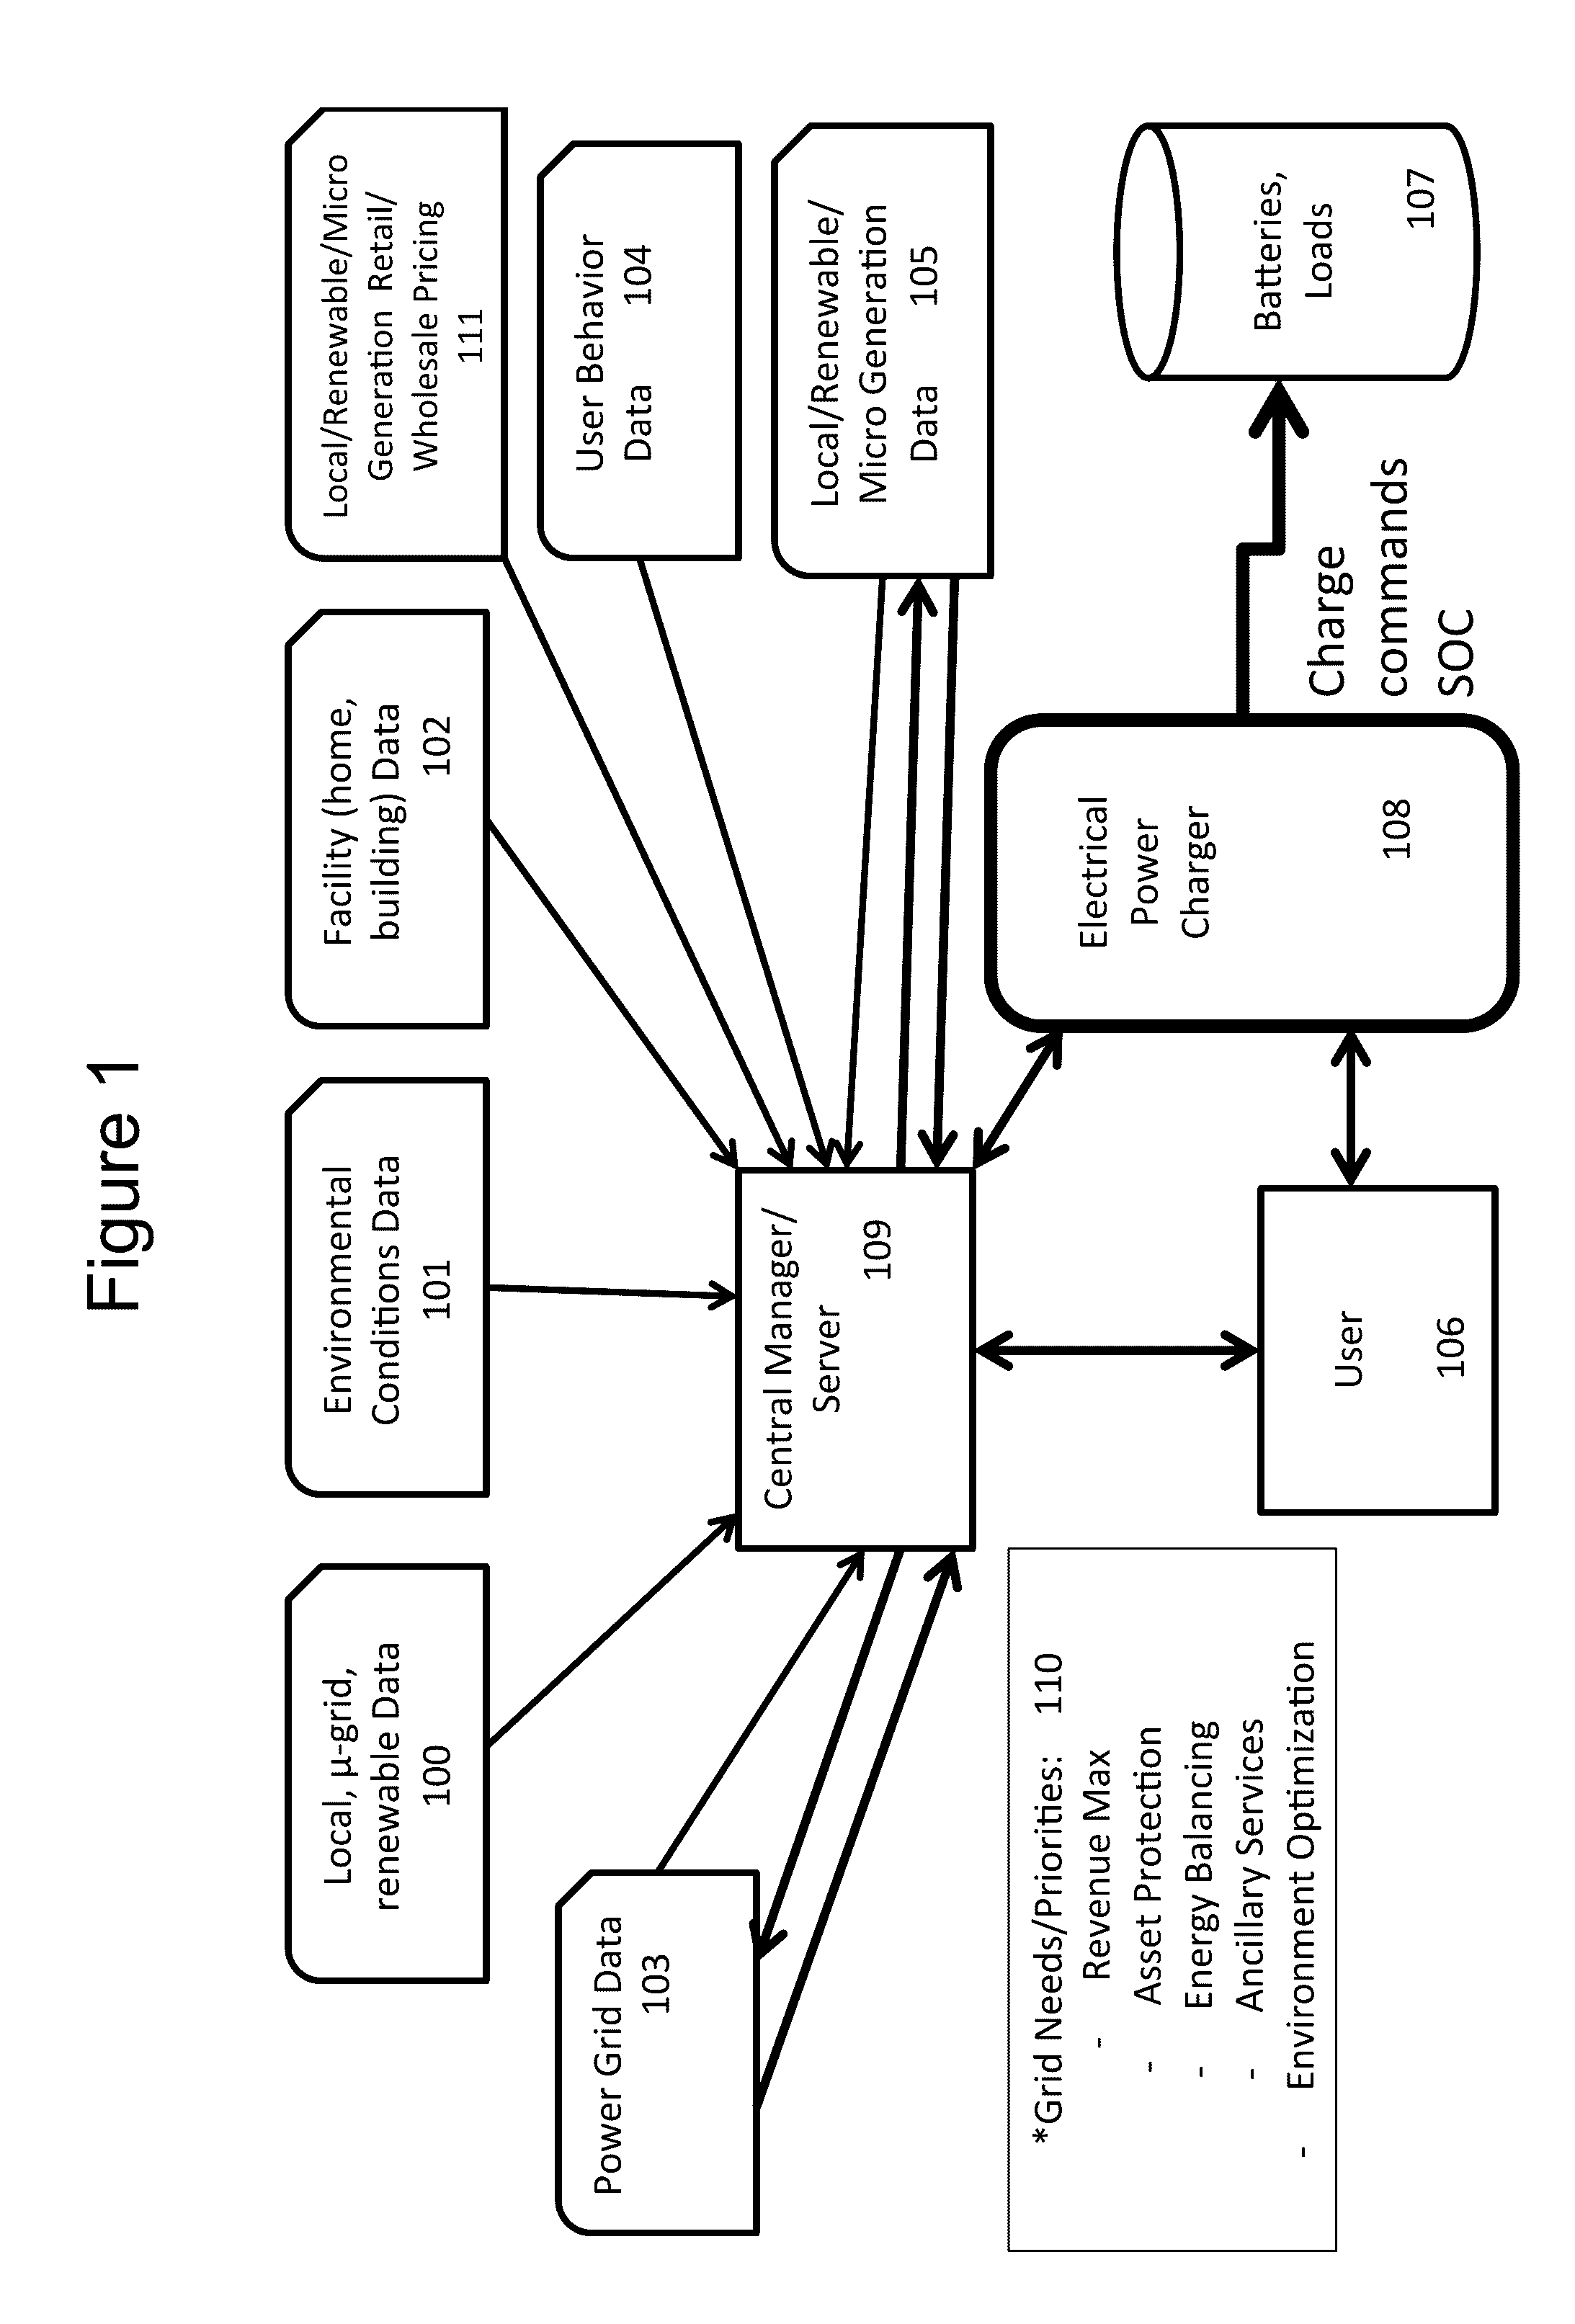 Systems and methods for electrical charging load modeling services to optimize power grid objectives